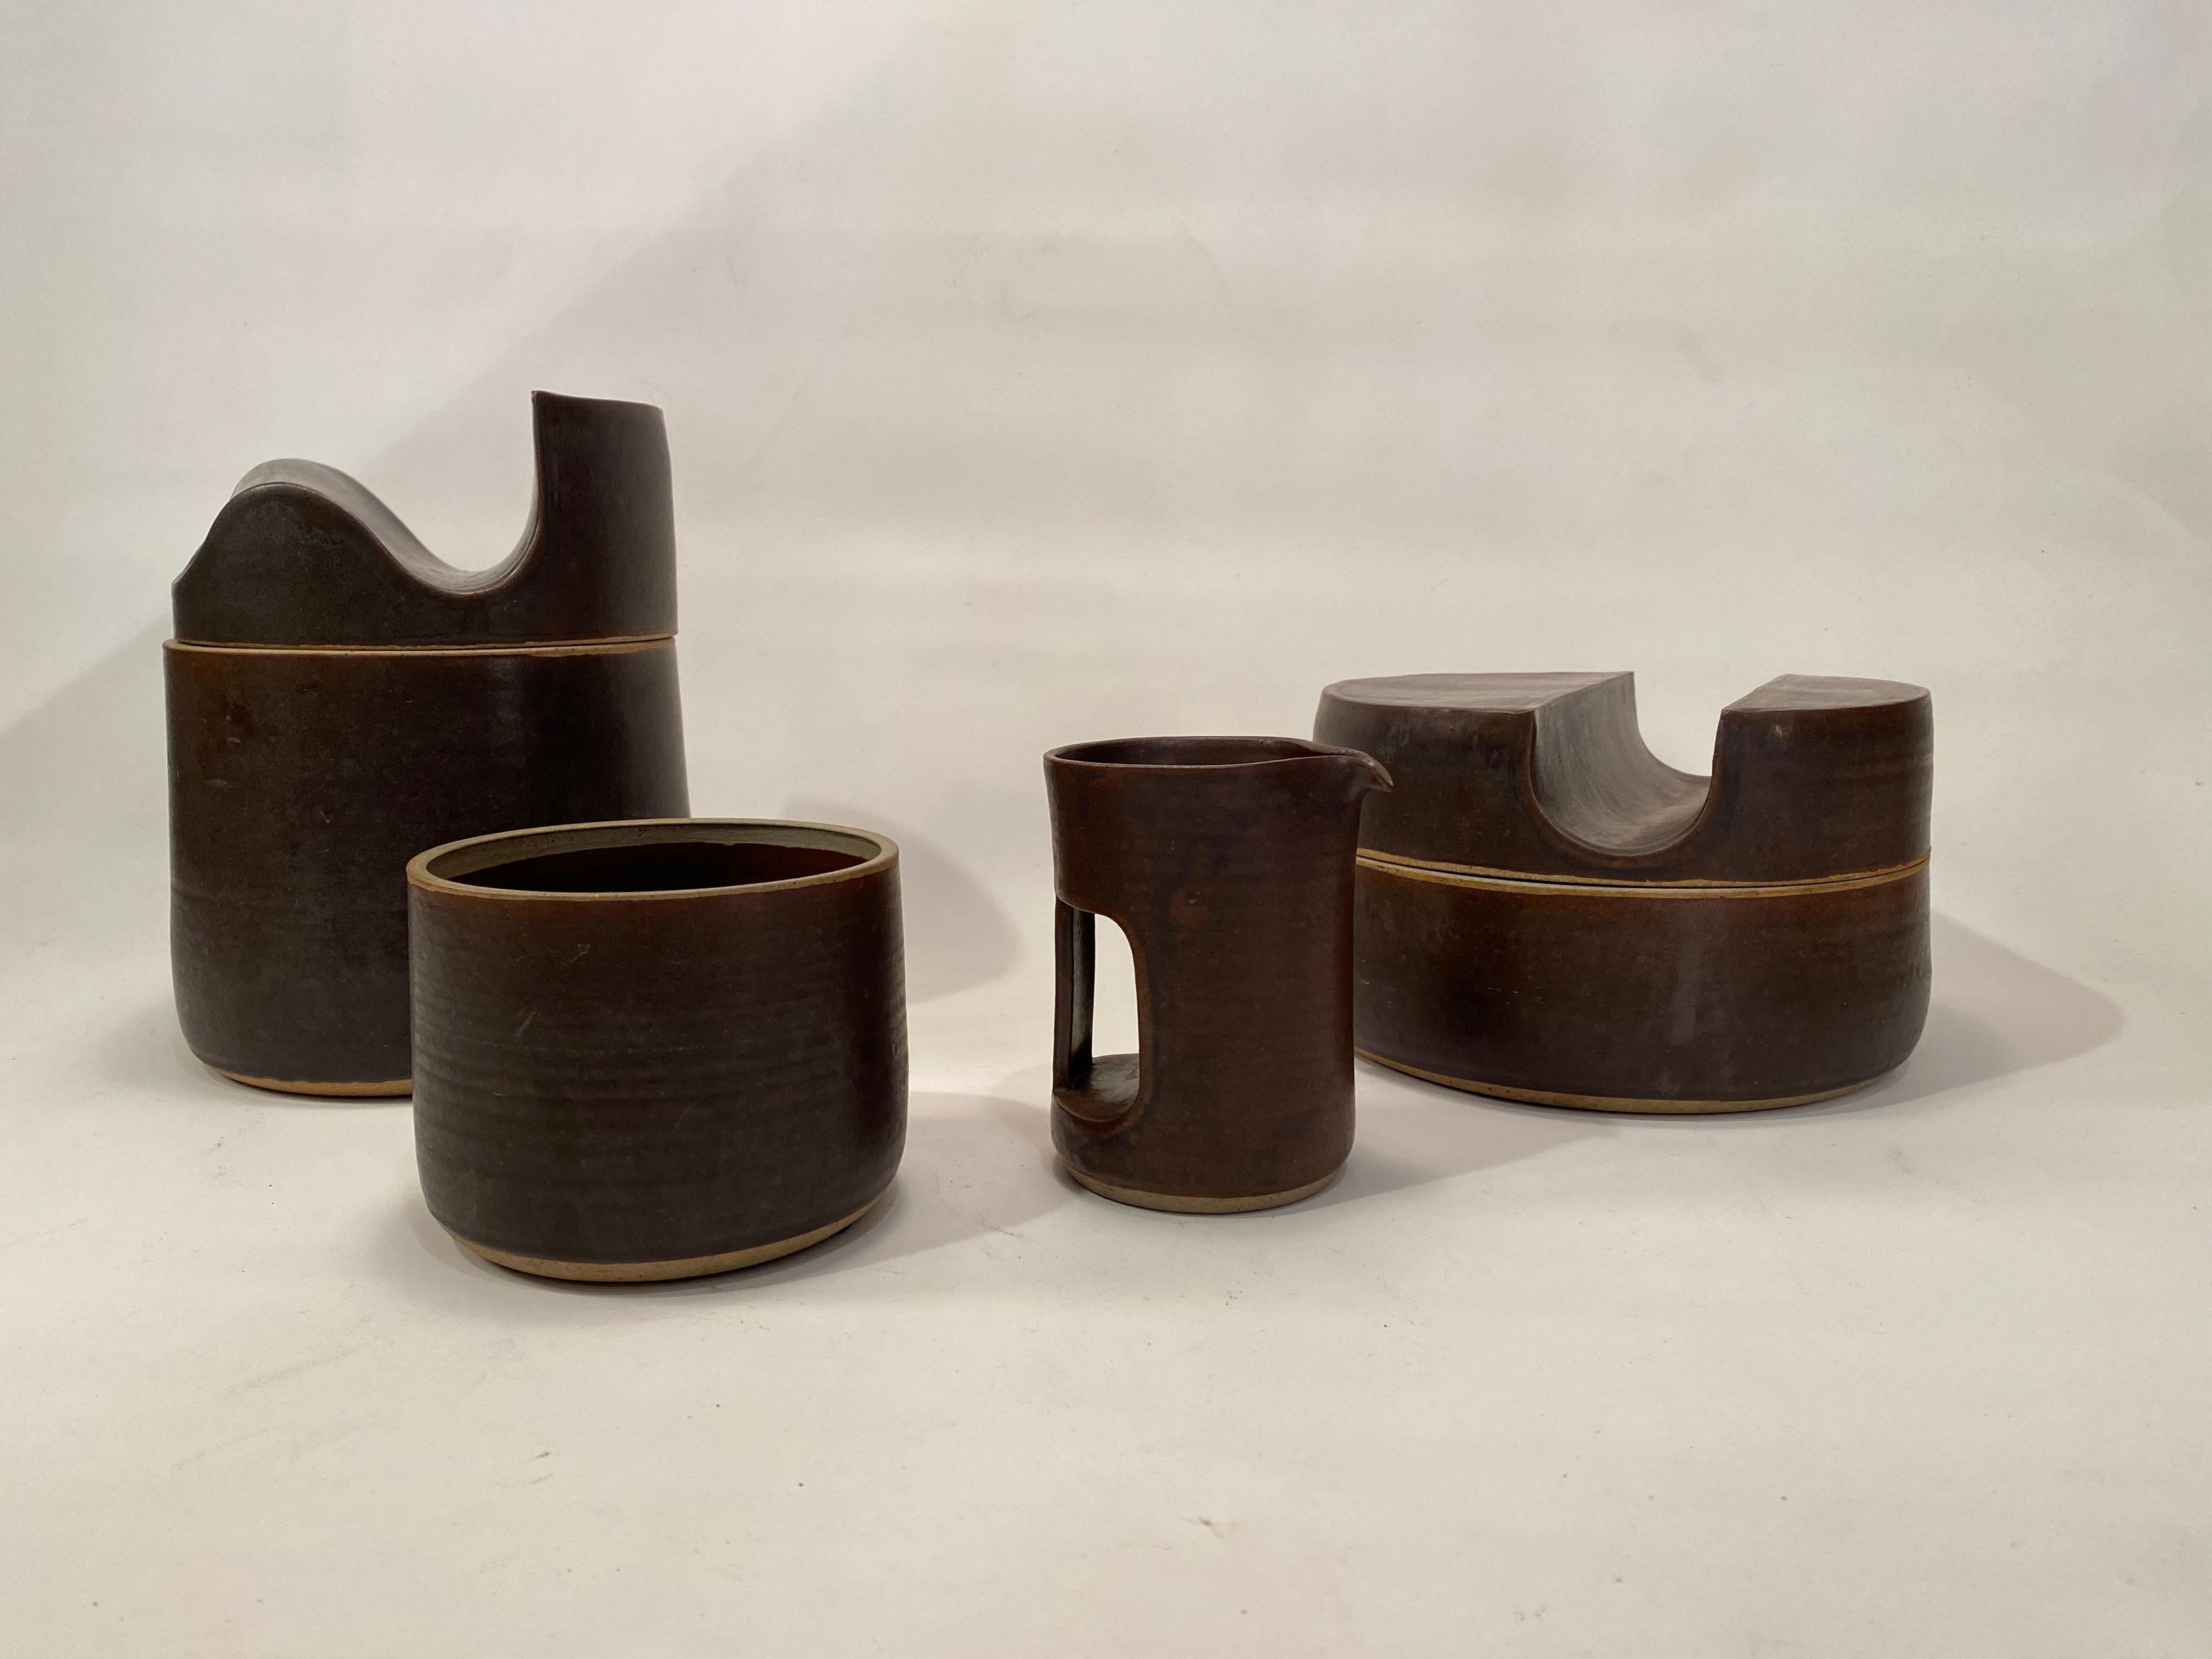 Four wonderfully executed matte brown drip glazed architectural pottery pieces by master potter, Don Williams. The ever productive and creative Don Williams can be viewed at donwilliamsclay. The grouping is comprised of two lidded vessels, a small